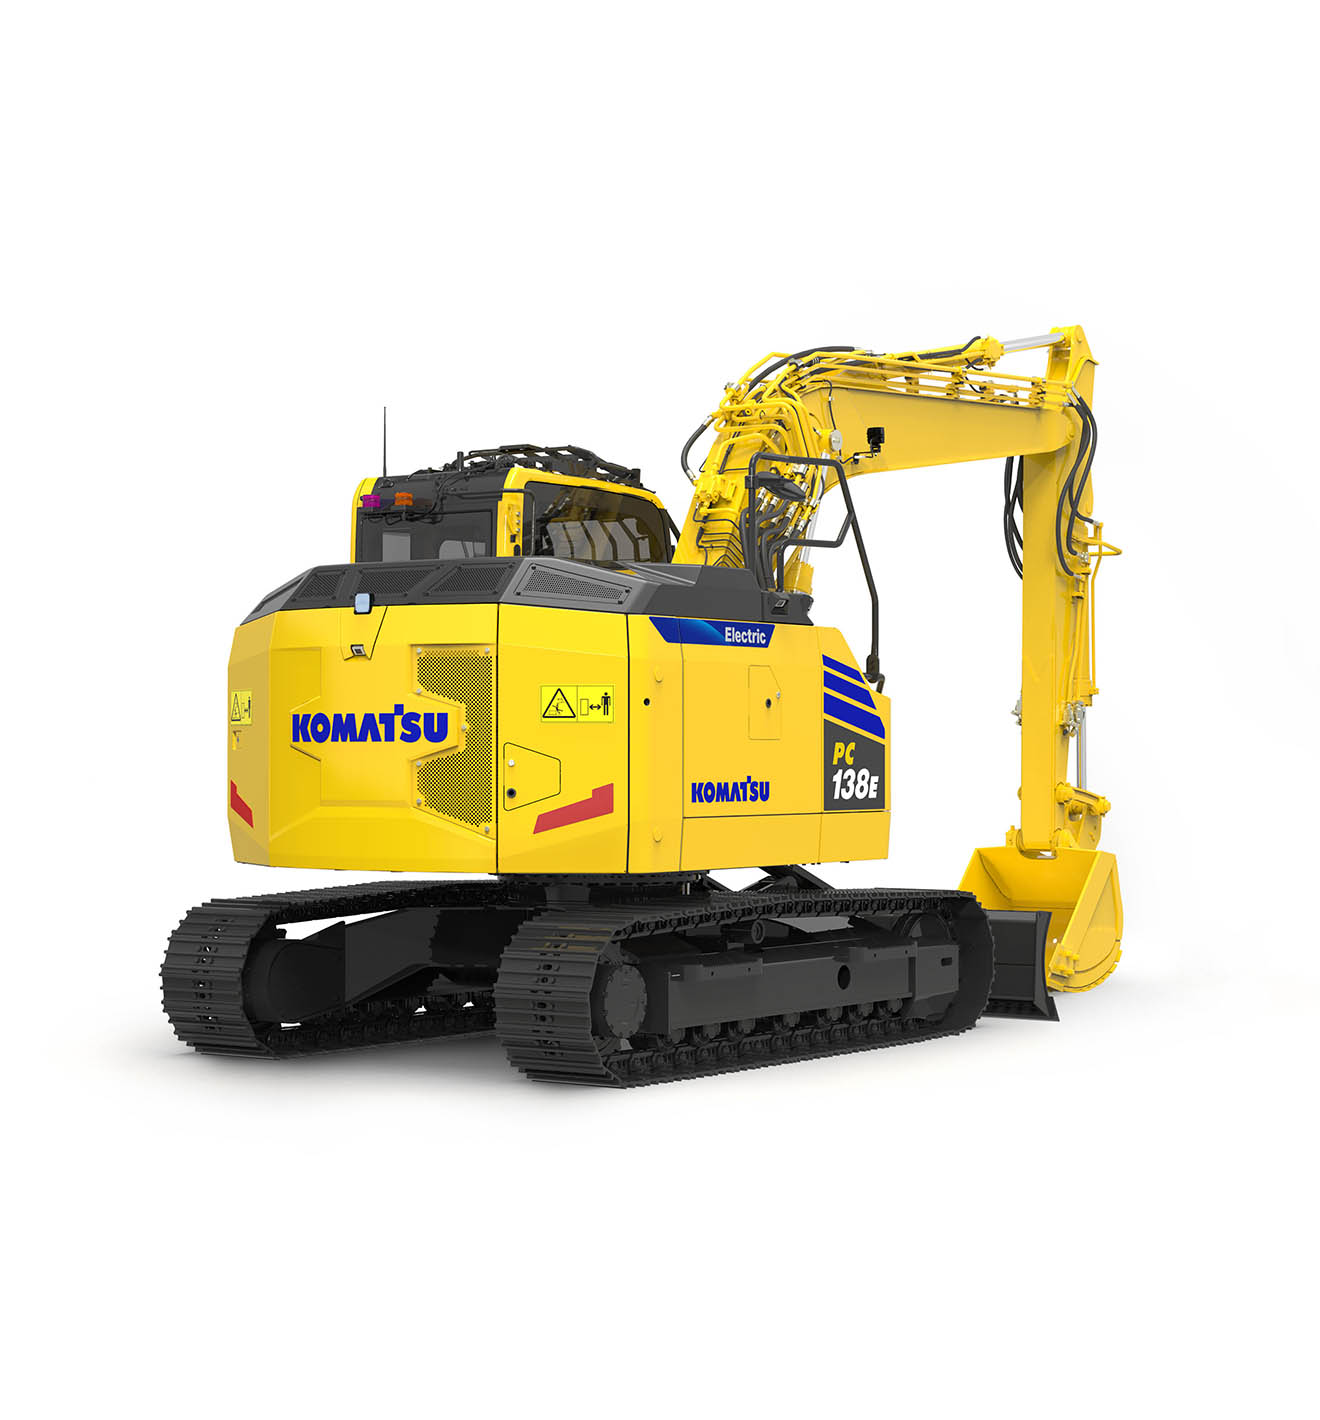 Komatsu ready to launch new 13 ton class PC138E-11 electric excavator with lithium-ion battery